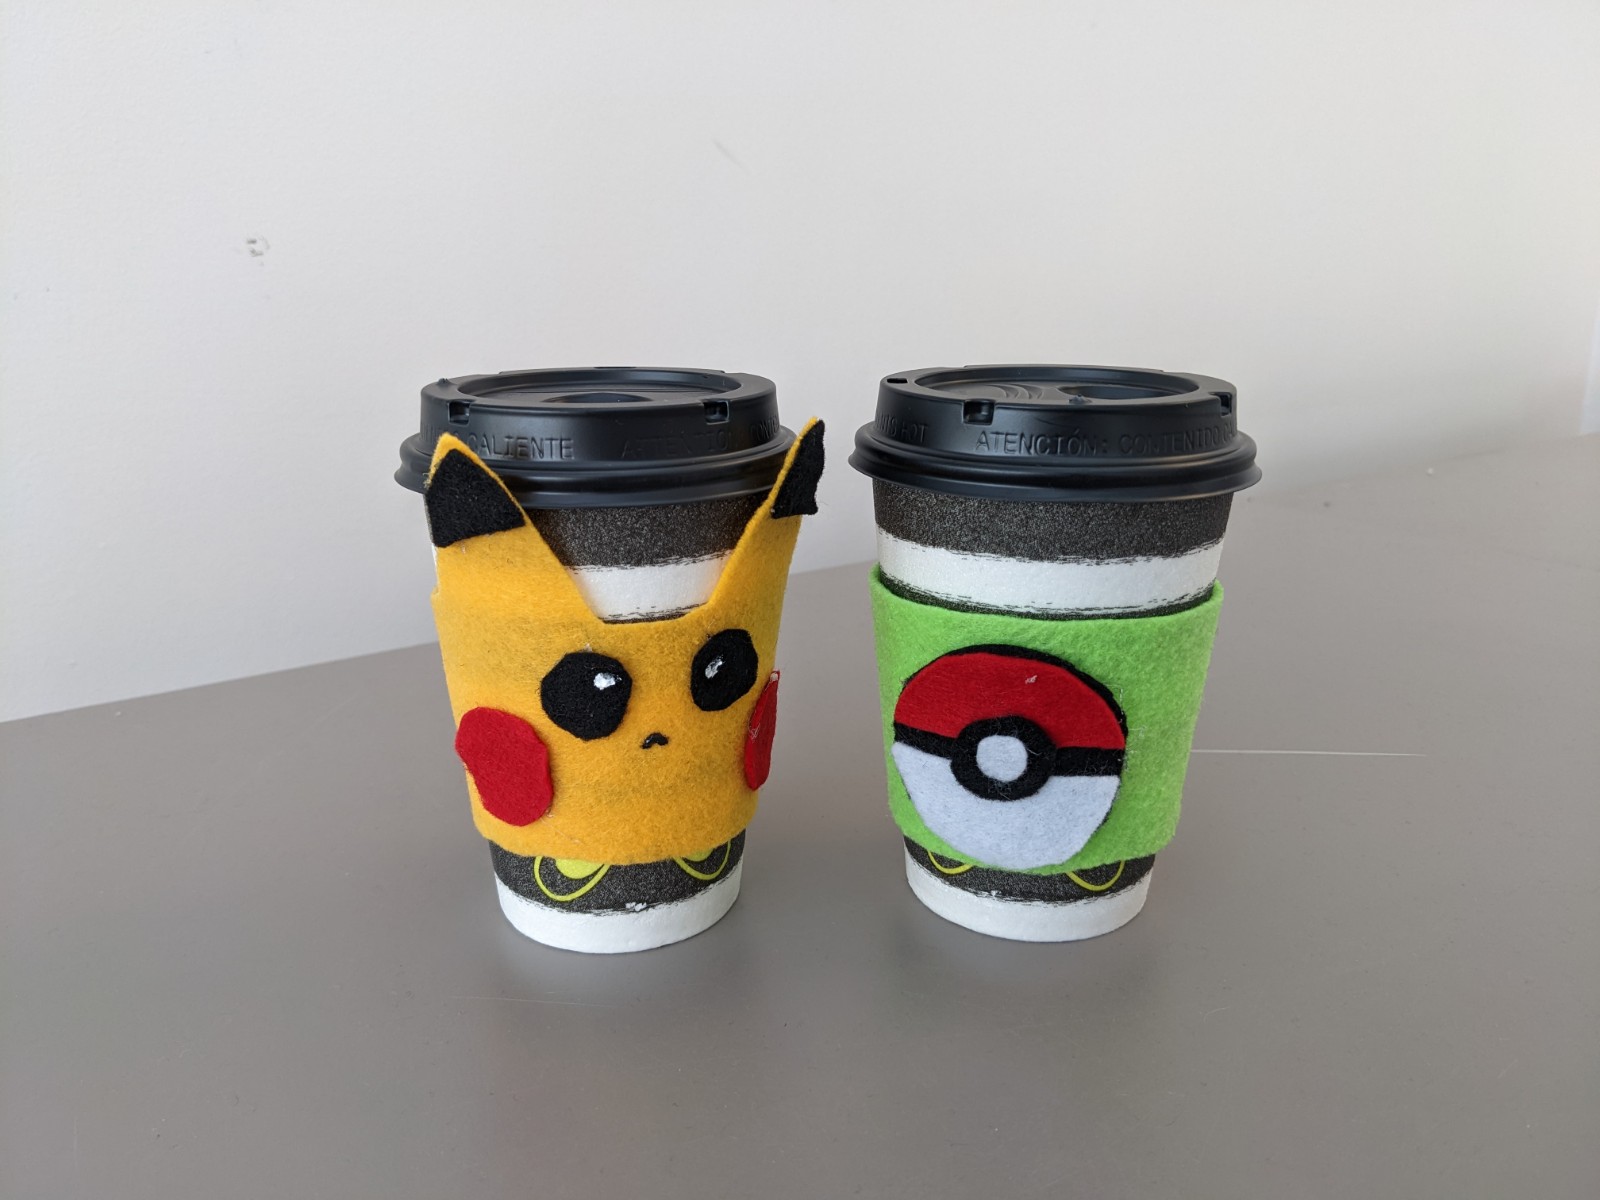 Pikachu face coffee cozy on disposable coffee cup and light green coffee cozy with Pokeball on second disposable coffee cup